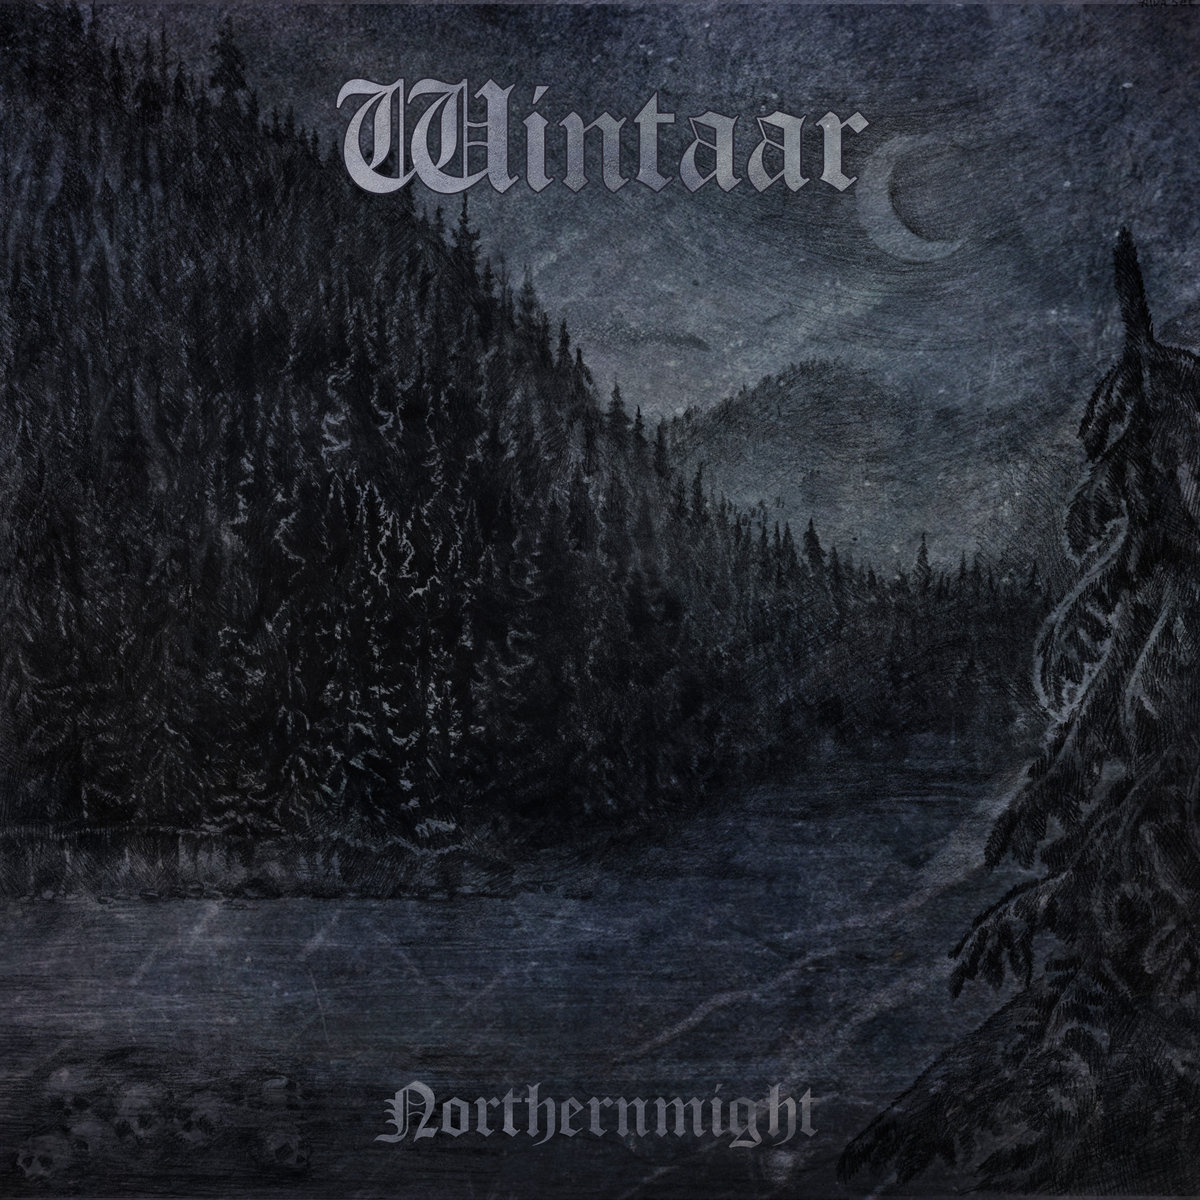 http://www.metalmusicarchives.com/images/covers/wintaar-northernmight-20180223091037.jpg